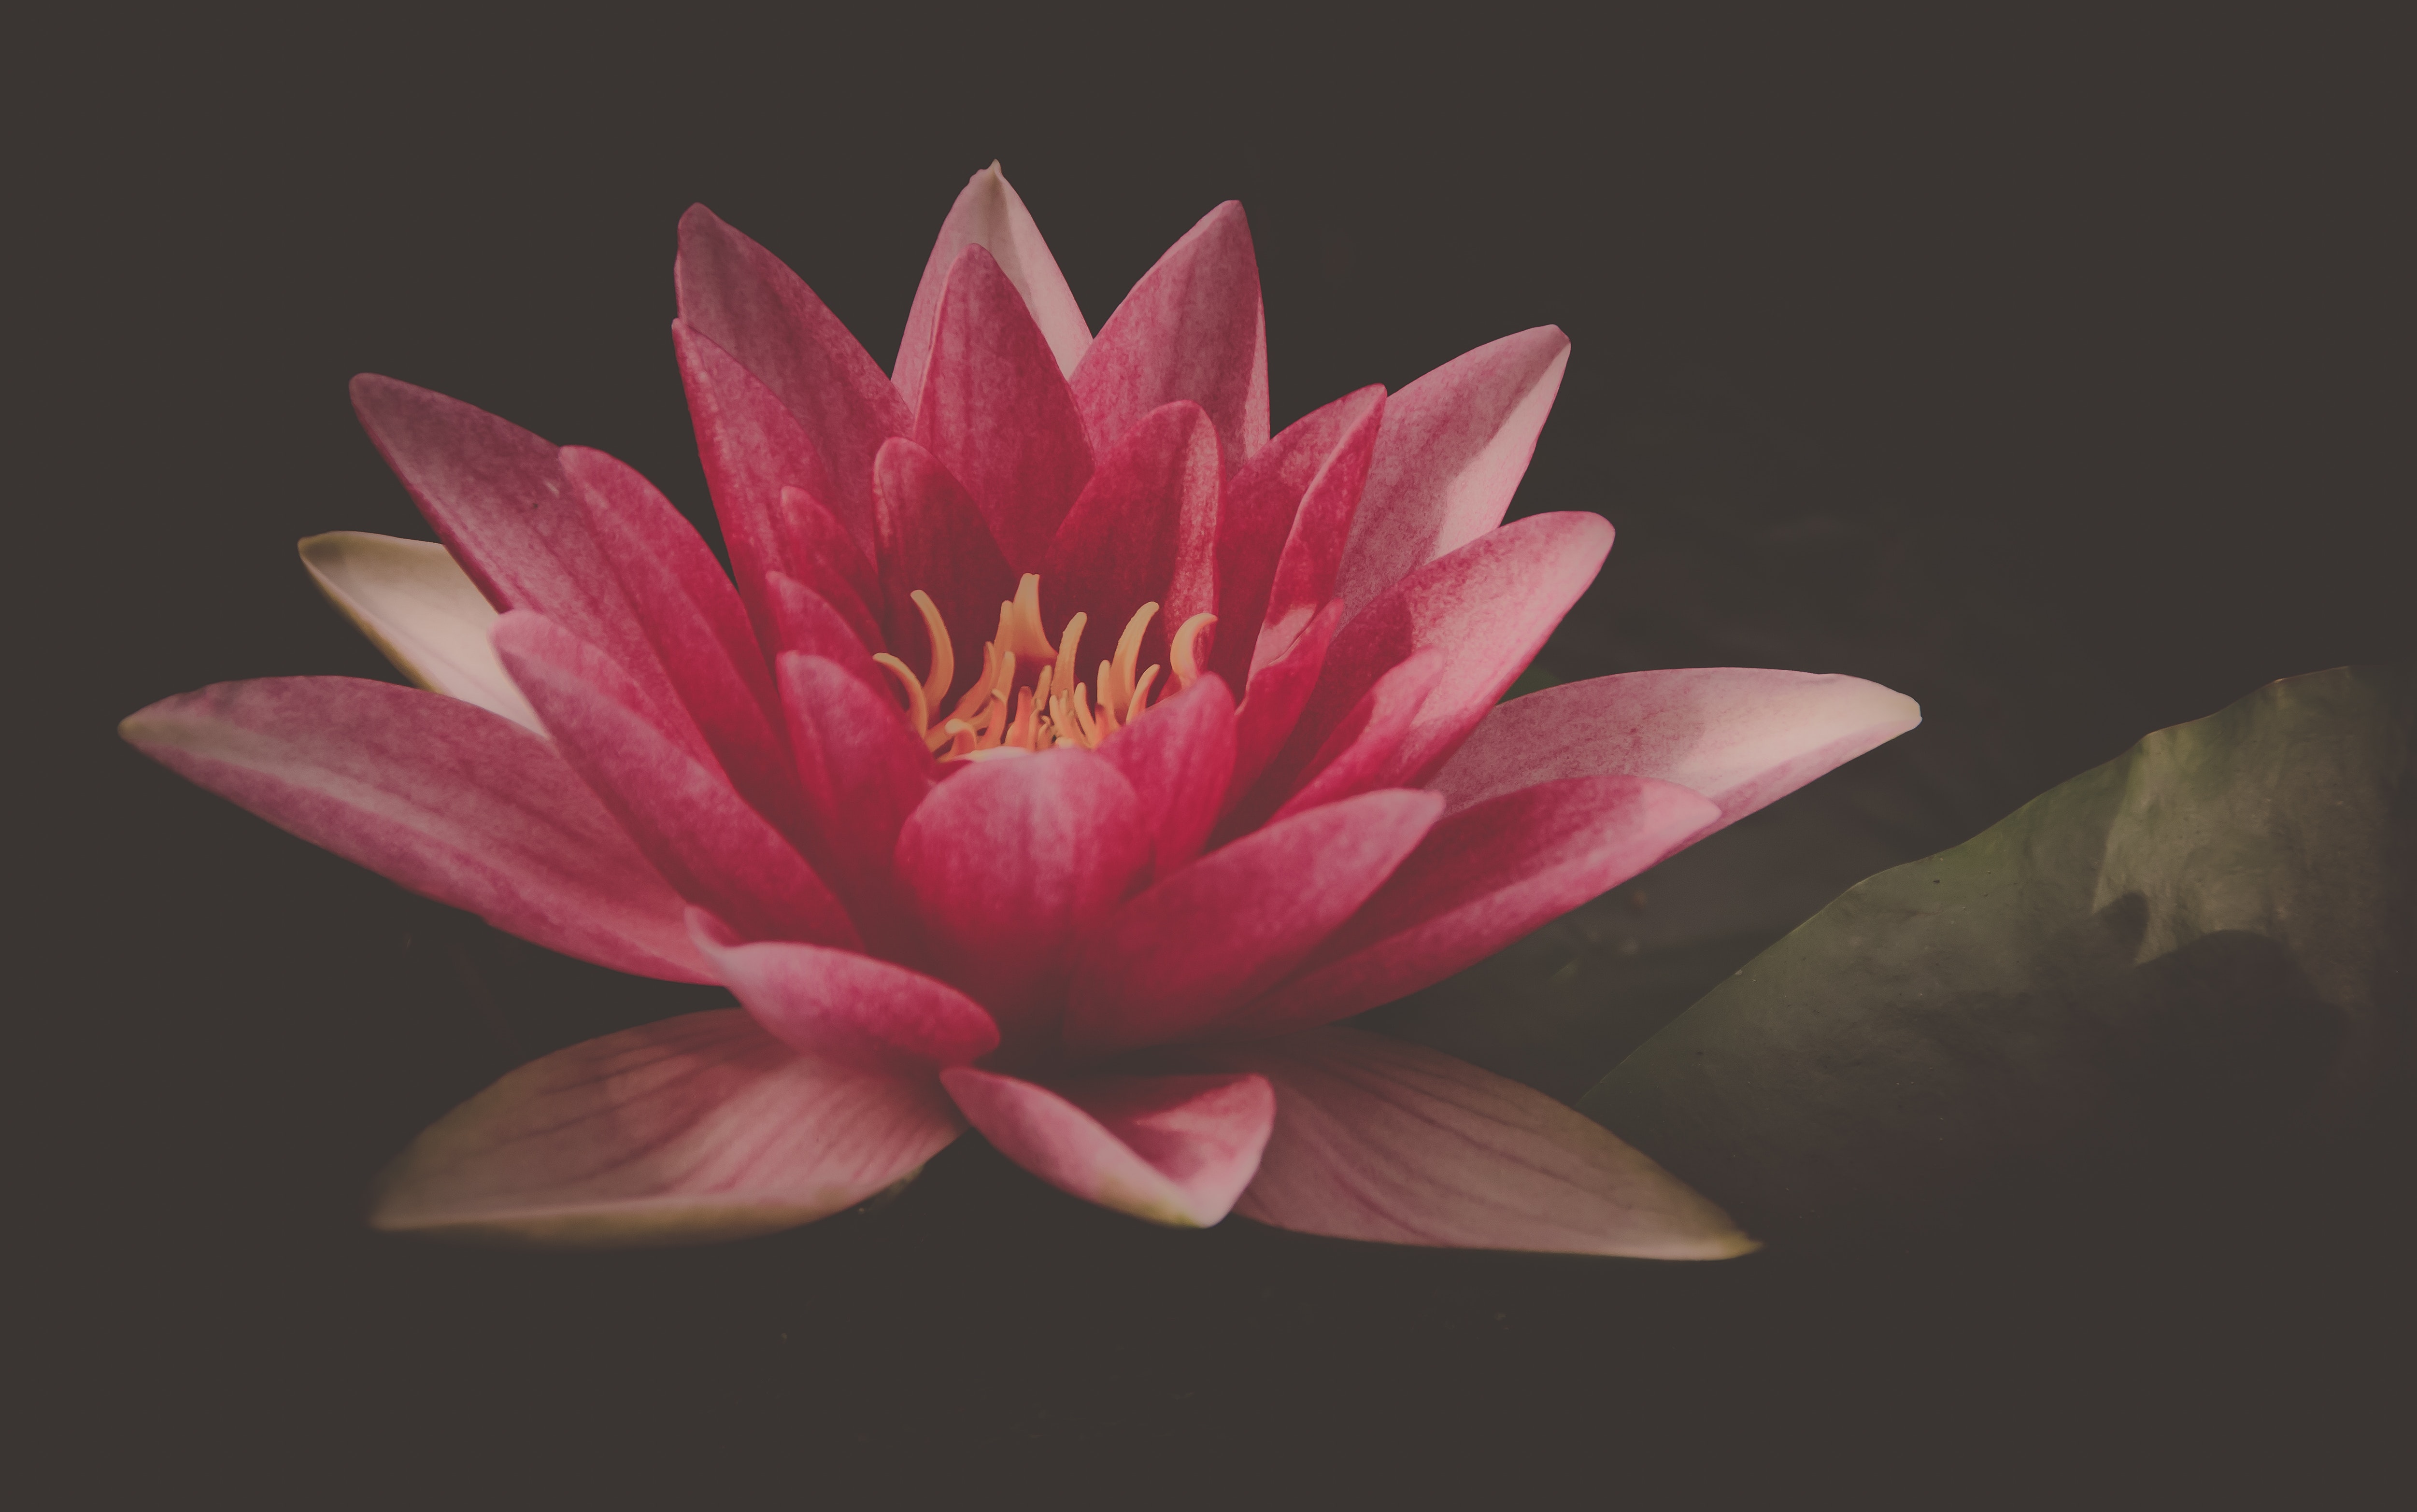 1000+ Great Water Lily Photos · Pexels · Free Stock Photos